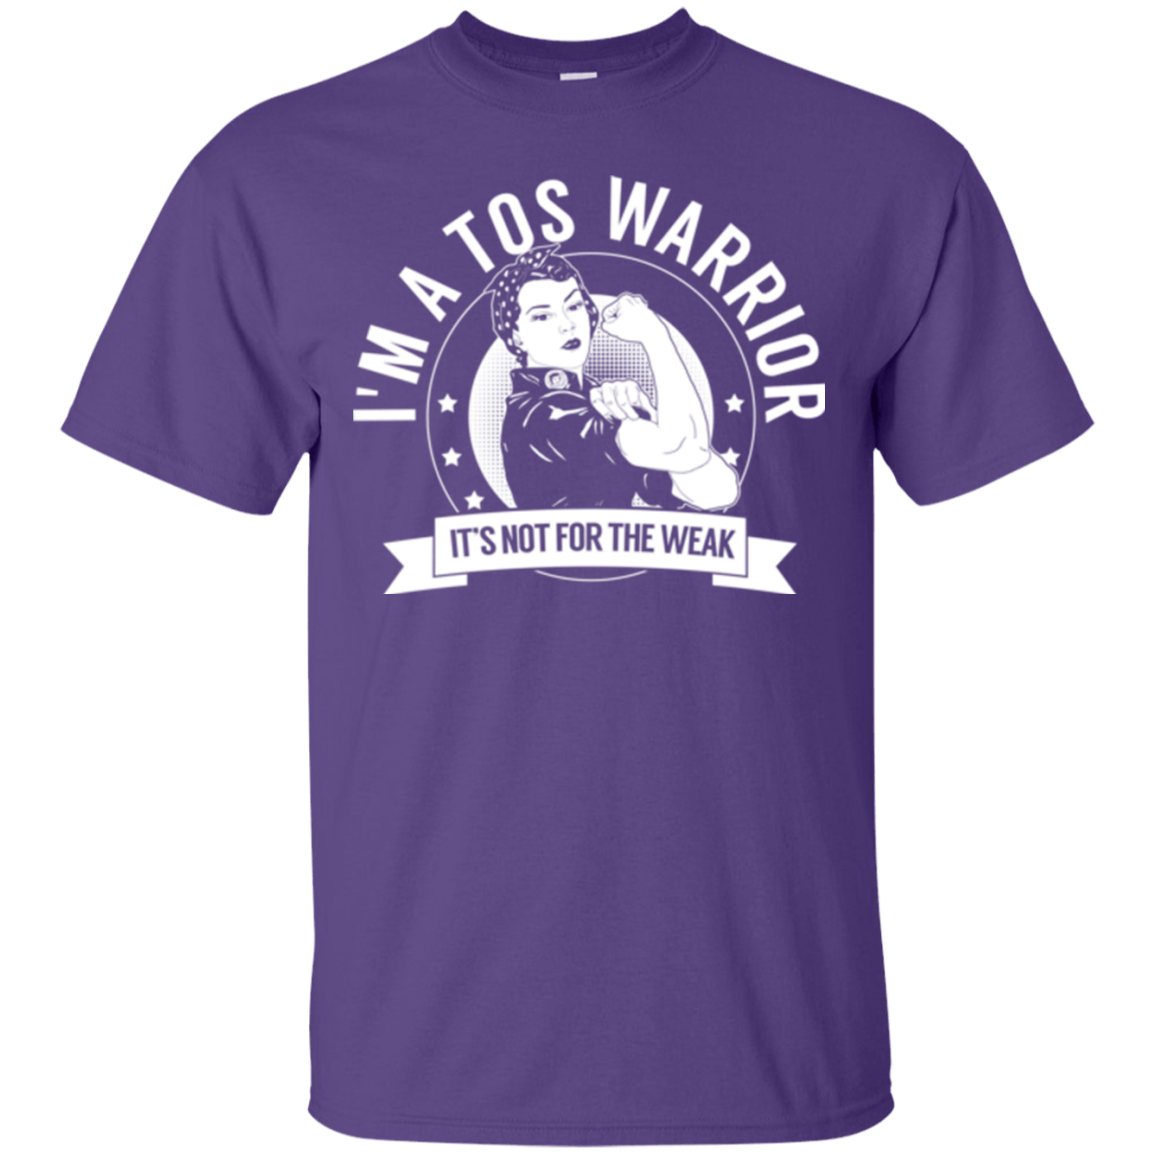 Thoracic Outlet Syndrome - TOS Warrior Not For The Weak Cotton T-Shirt - The Unchargeables